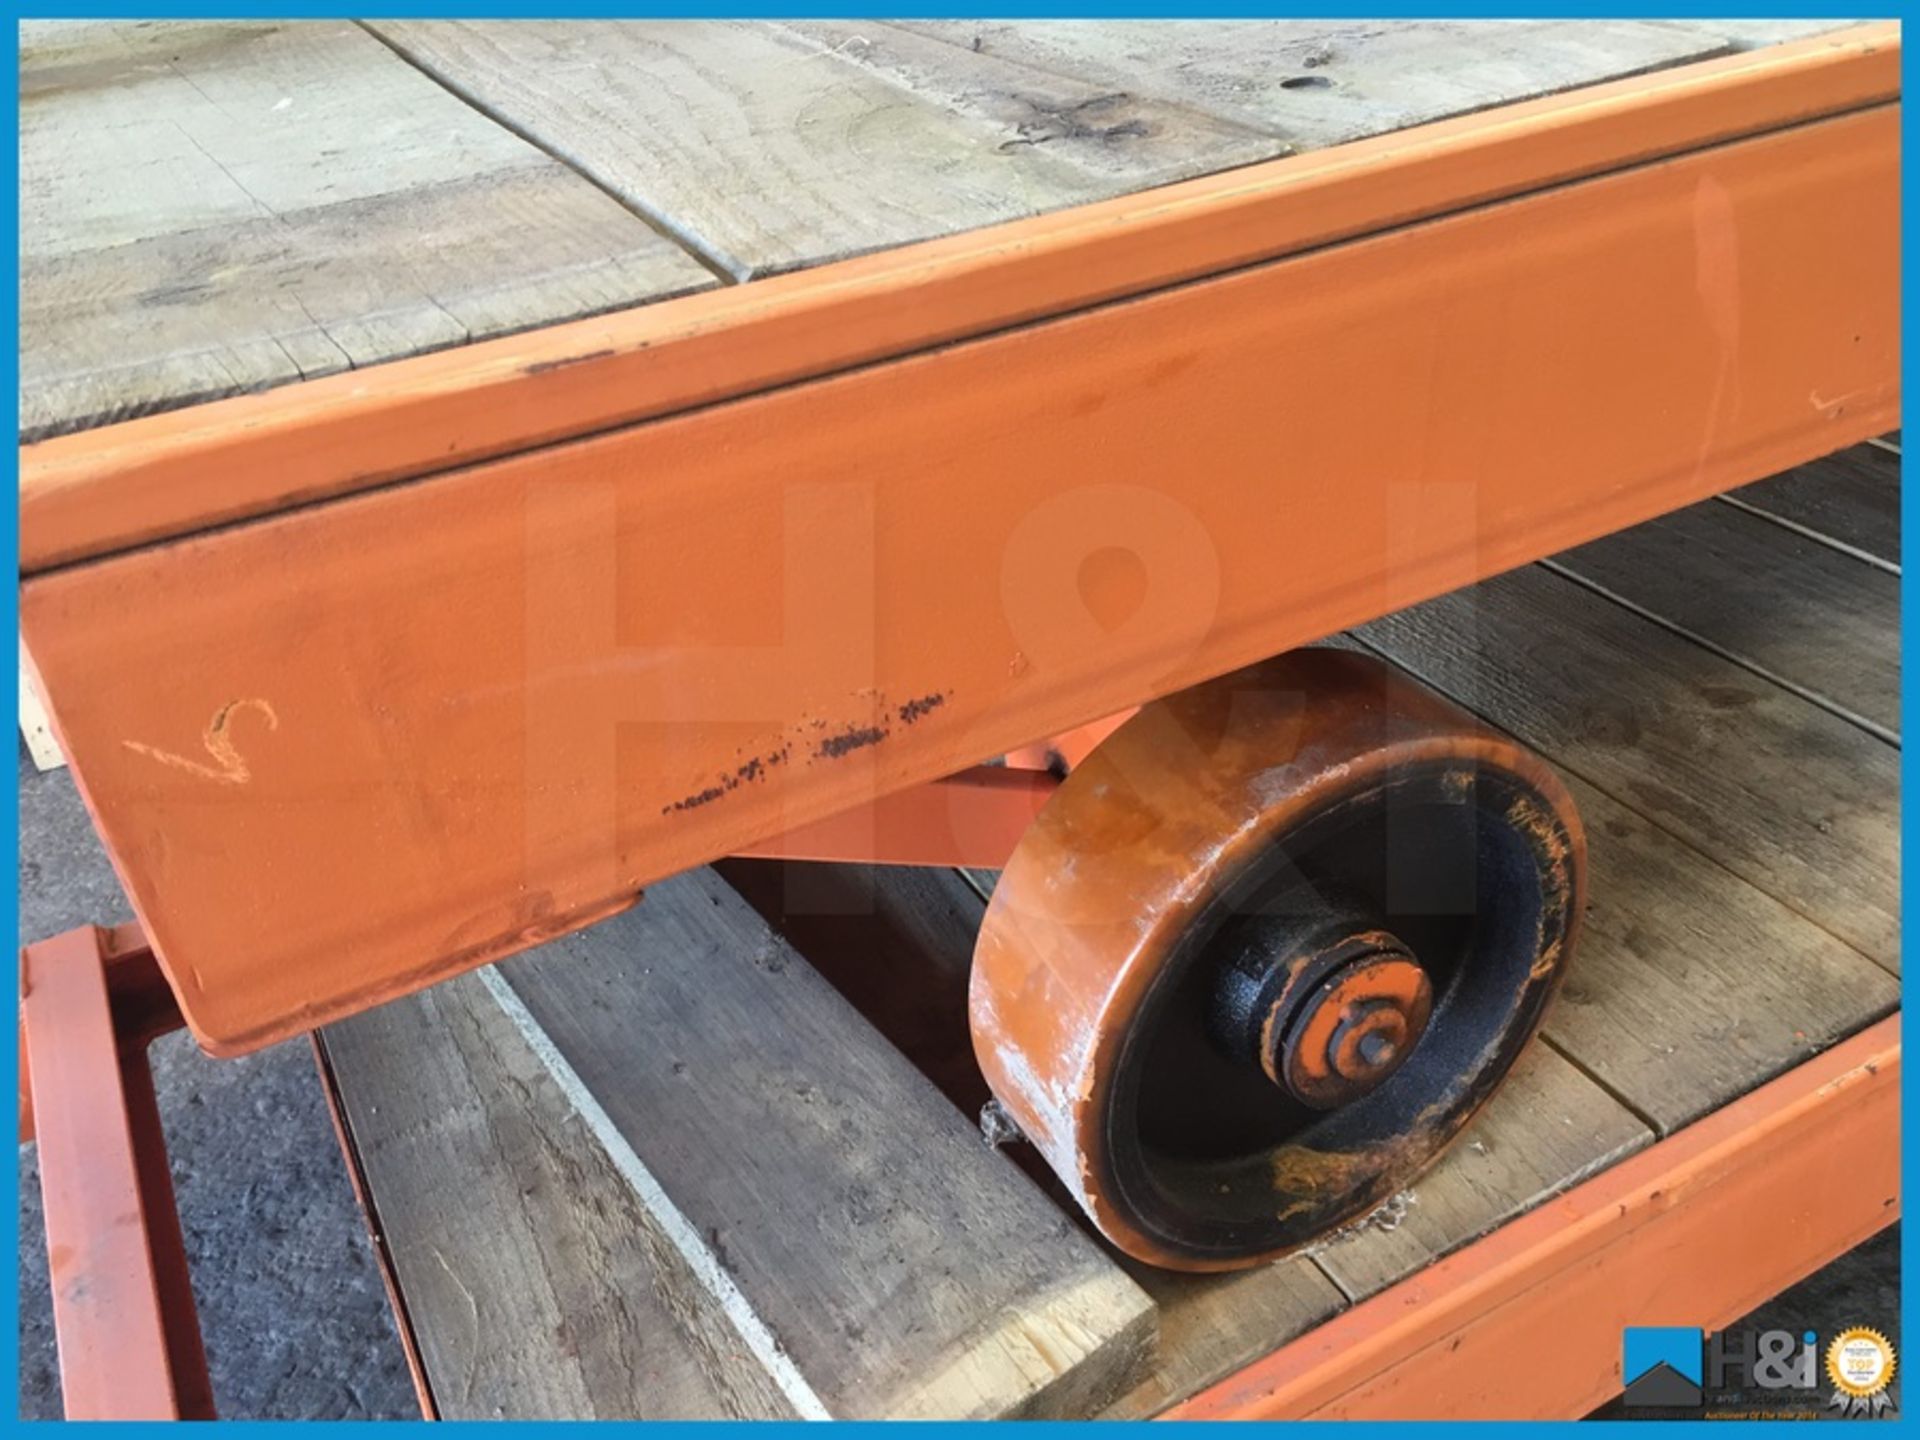 Unused wheeled trolley bogey with steerable axle and urethane wheels. Timber decked, 10 tonne - Image 2 of 6